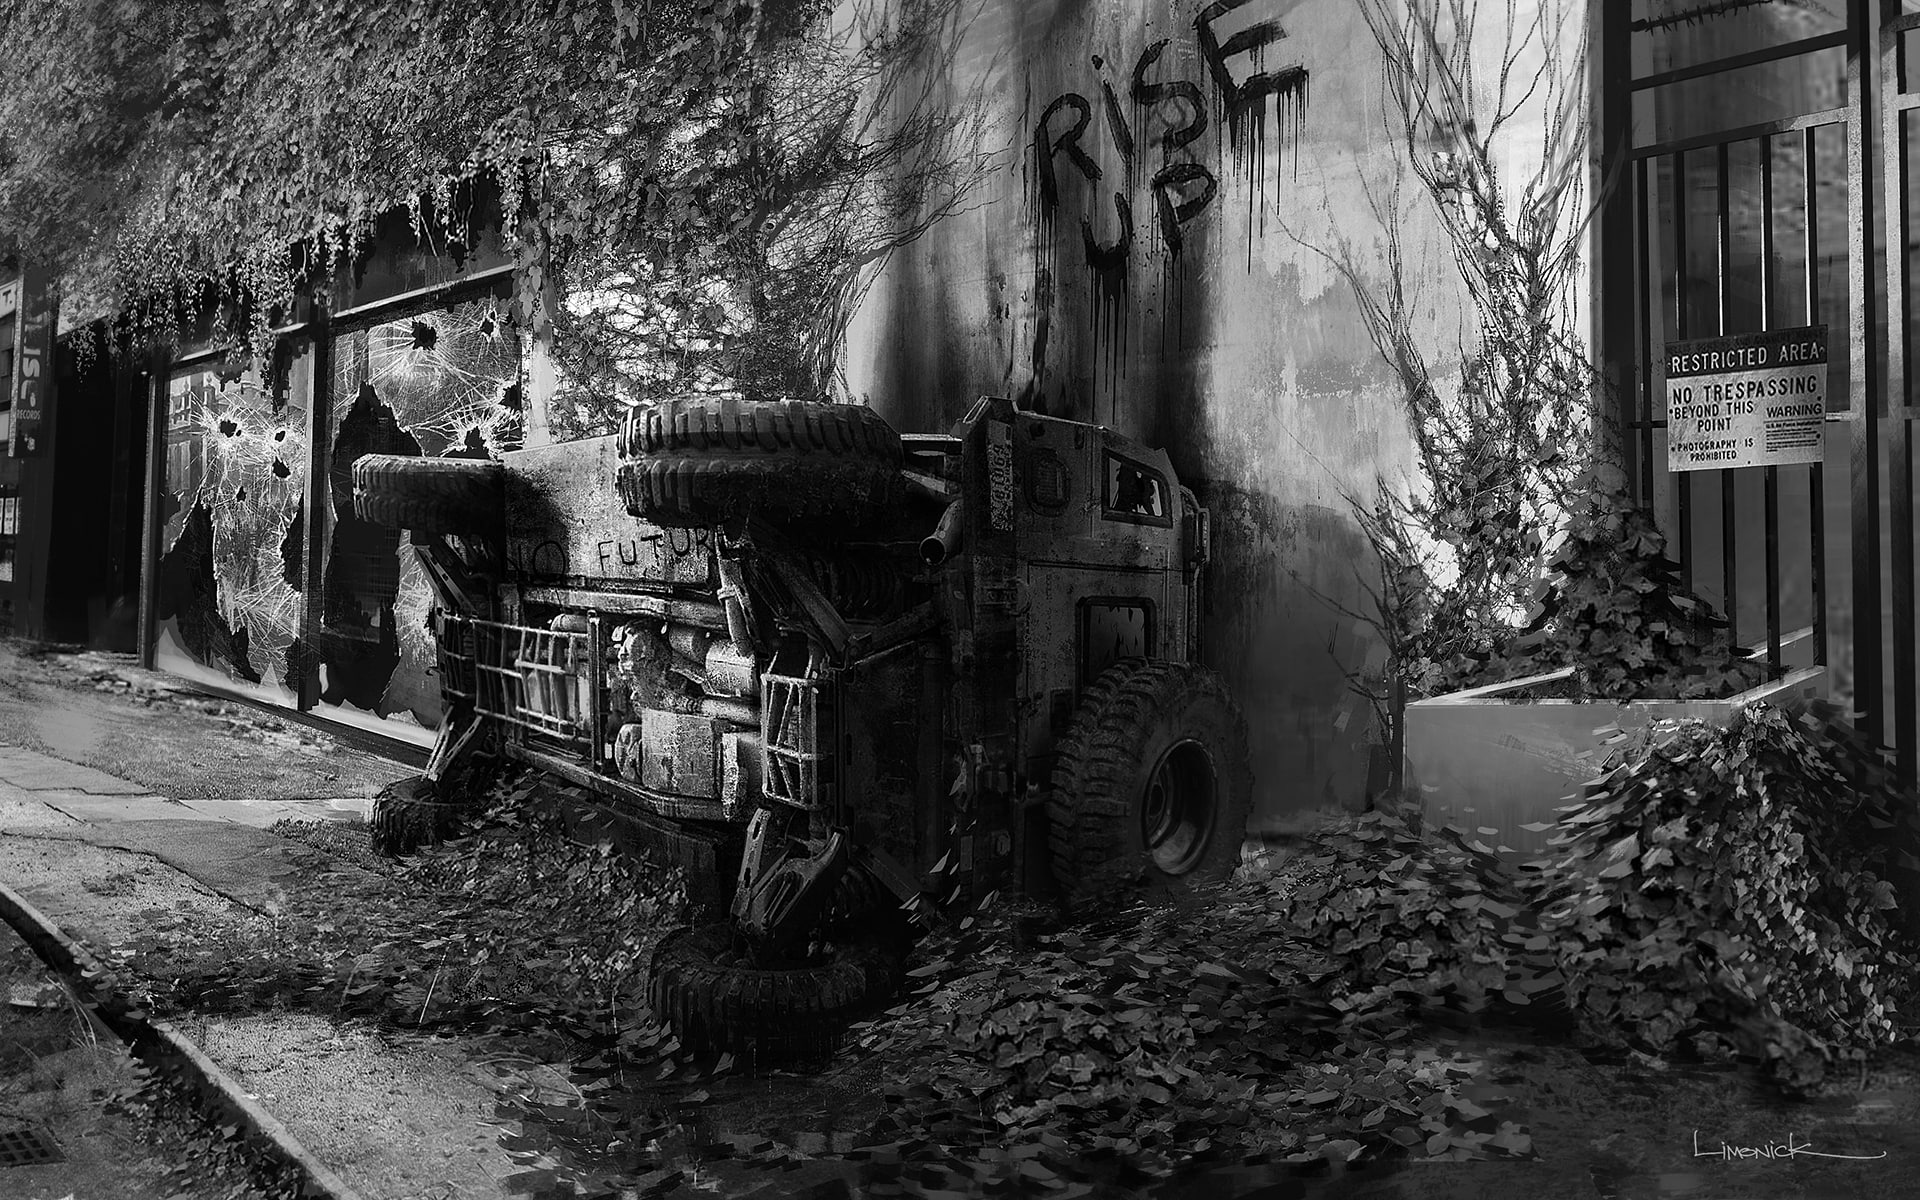 Abandon, anarchy, apocalyptic, Deserted, Overturned, Riot, Truck